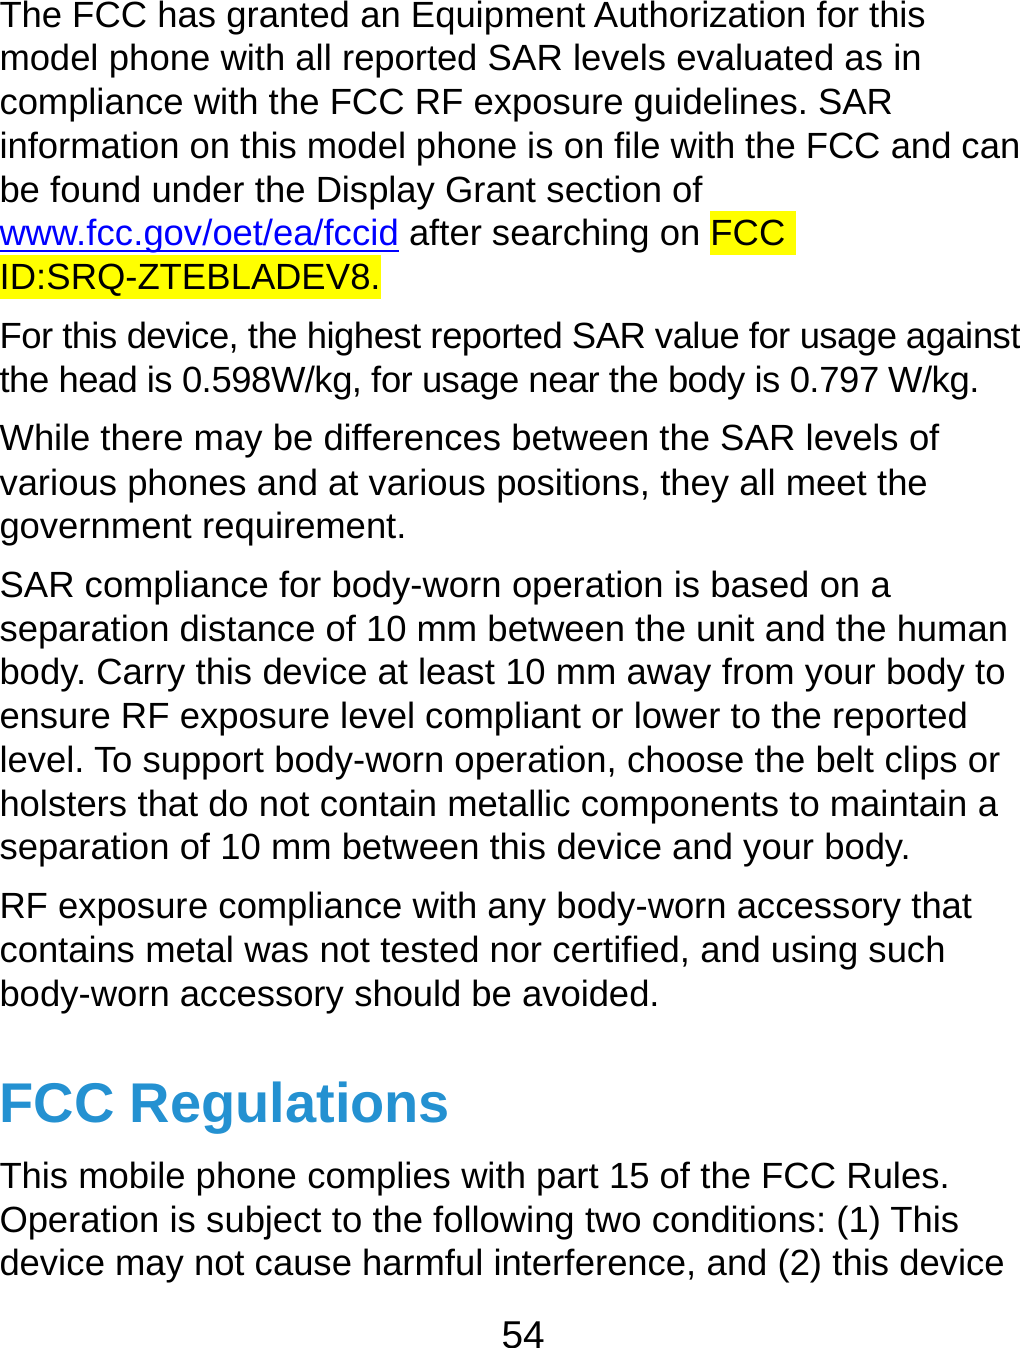  54 The FCC has granted an Equipment Authorization for this model phone with all reported SAR levels evaluated as in compliance with the FCC RF exposure guidelines. SAR information on this model phone is on file with the FCC and can be found under the Display Grant section of www.fcc.gov/oet/ea/fccid after searching on FCC ID:SRQ-ZTEBLADEV8. For this device, the highest reported SAR value for usage against the head is 0.598W/kg, for usage near the body is 0.797 W/kg. While there may be differences between the SAR levels of various phones and at various positions, they all meet the government requirement. SAR compliance for body-worn operation is based on a separation distance of 10 mm between the unit and the human body. Carry this device at least 10 mm away from your body to ensure RF exposure level compliant or lower to the reported level. To support body-worn operation, choose the belt clips or holsters that do not contain metallic components to maintain a separation of 10 mm between this device and your body. RF exposure compliance with any body-worn accessory that contains metal was not tested nor certified, and using such body-worn accessory should be avoided. FCC Regulations This mobile phone complies with part 15 of the FCC Rules. Operation is subject to the following two conditions: (1) This device may not cause harmful interference, and (2) this device 